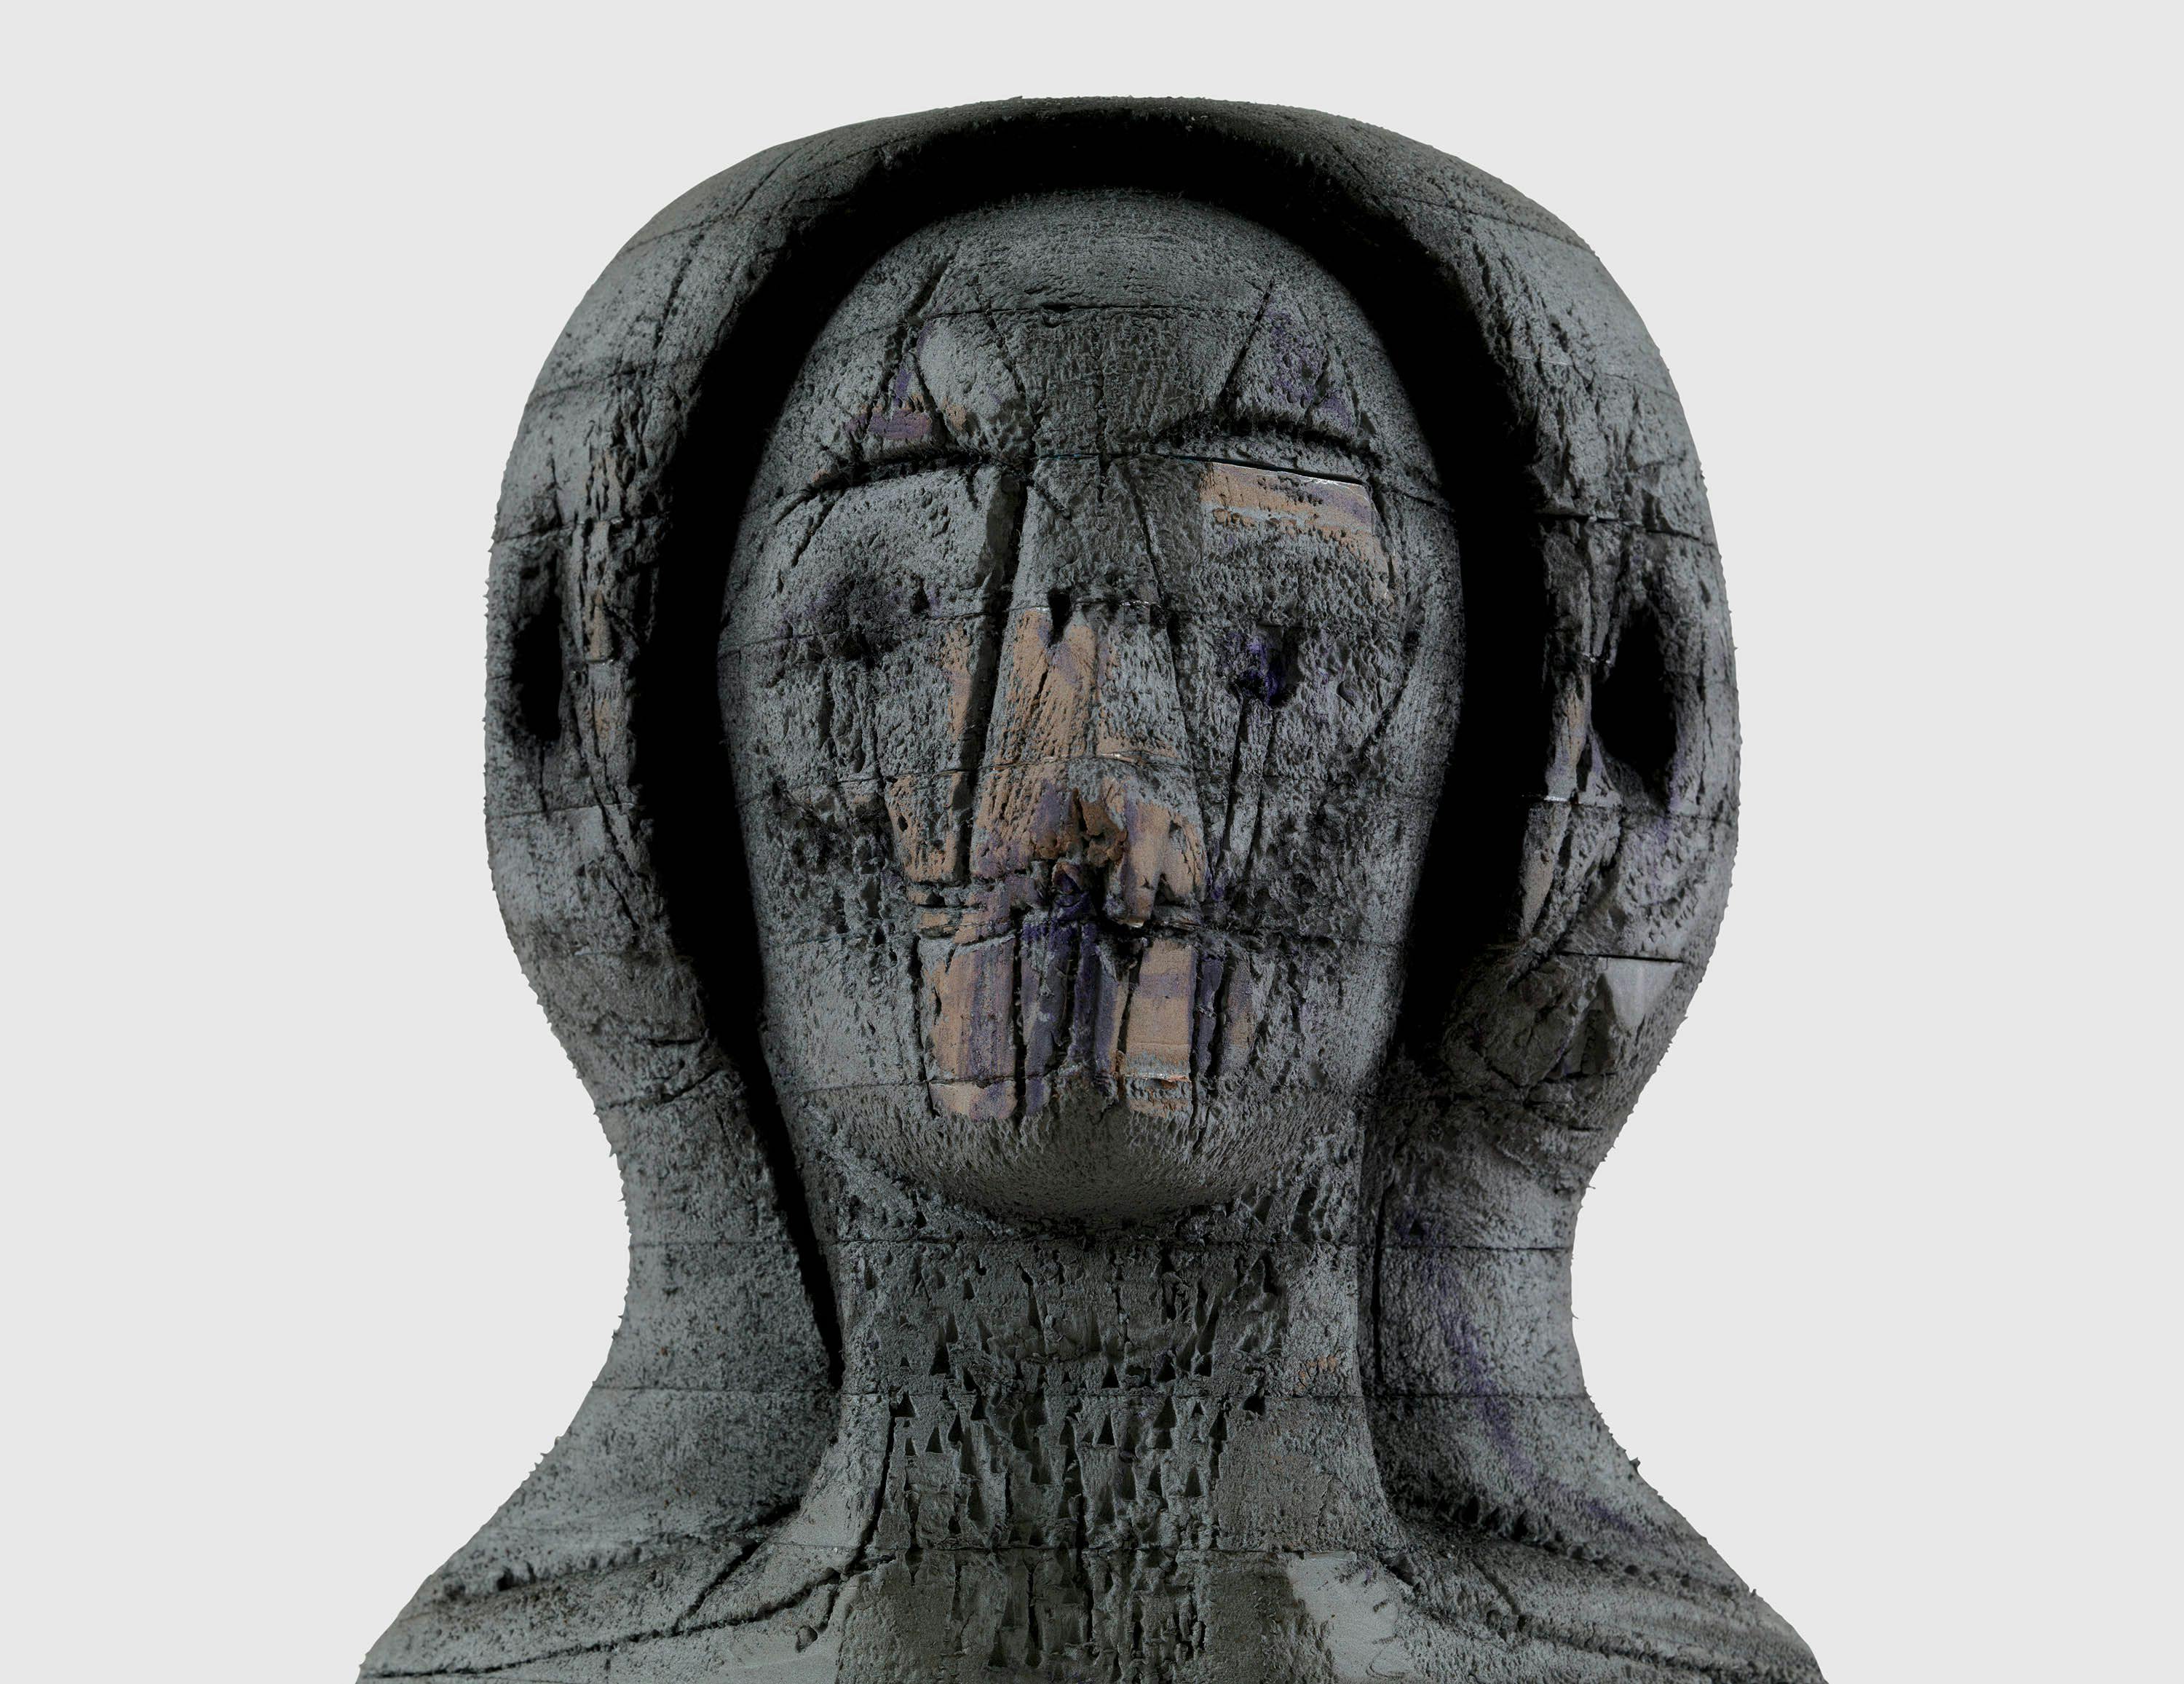 A detail from a mixed media sculpture by Huma Bhabha, titled I'm A Friend, dated 2022.